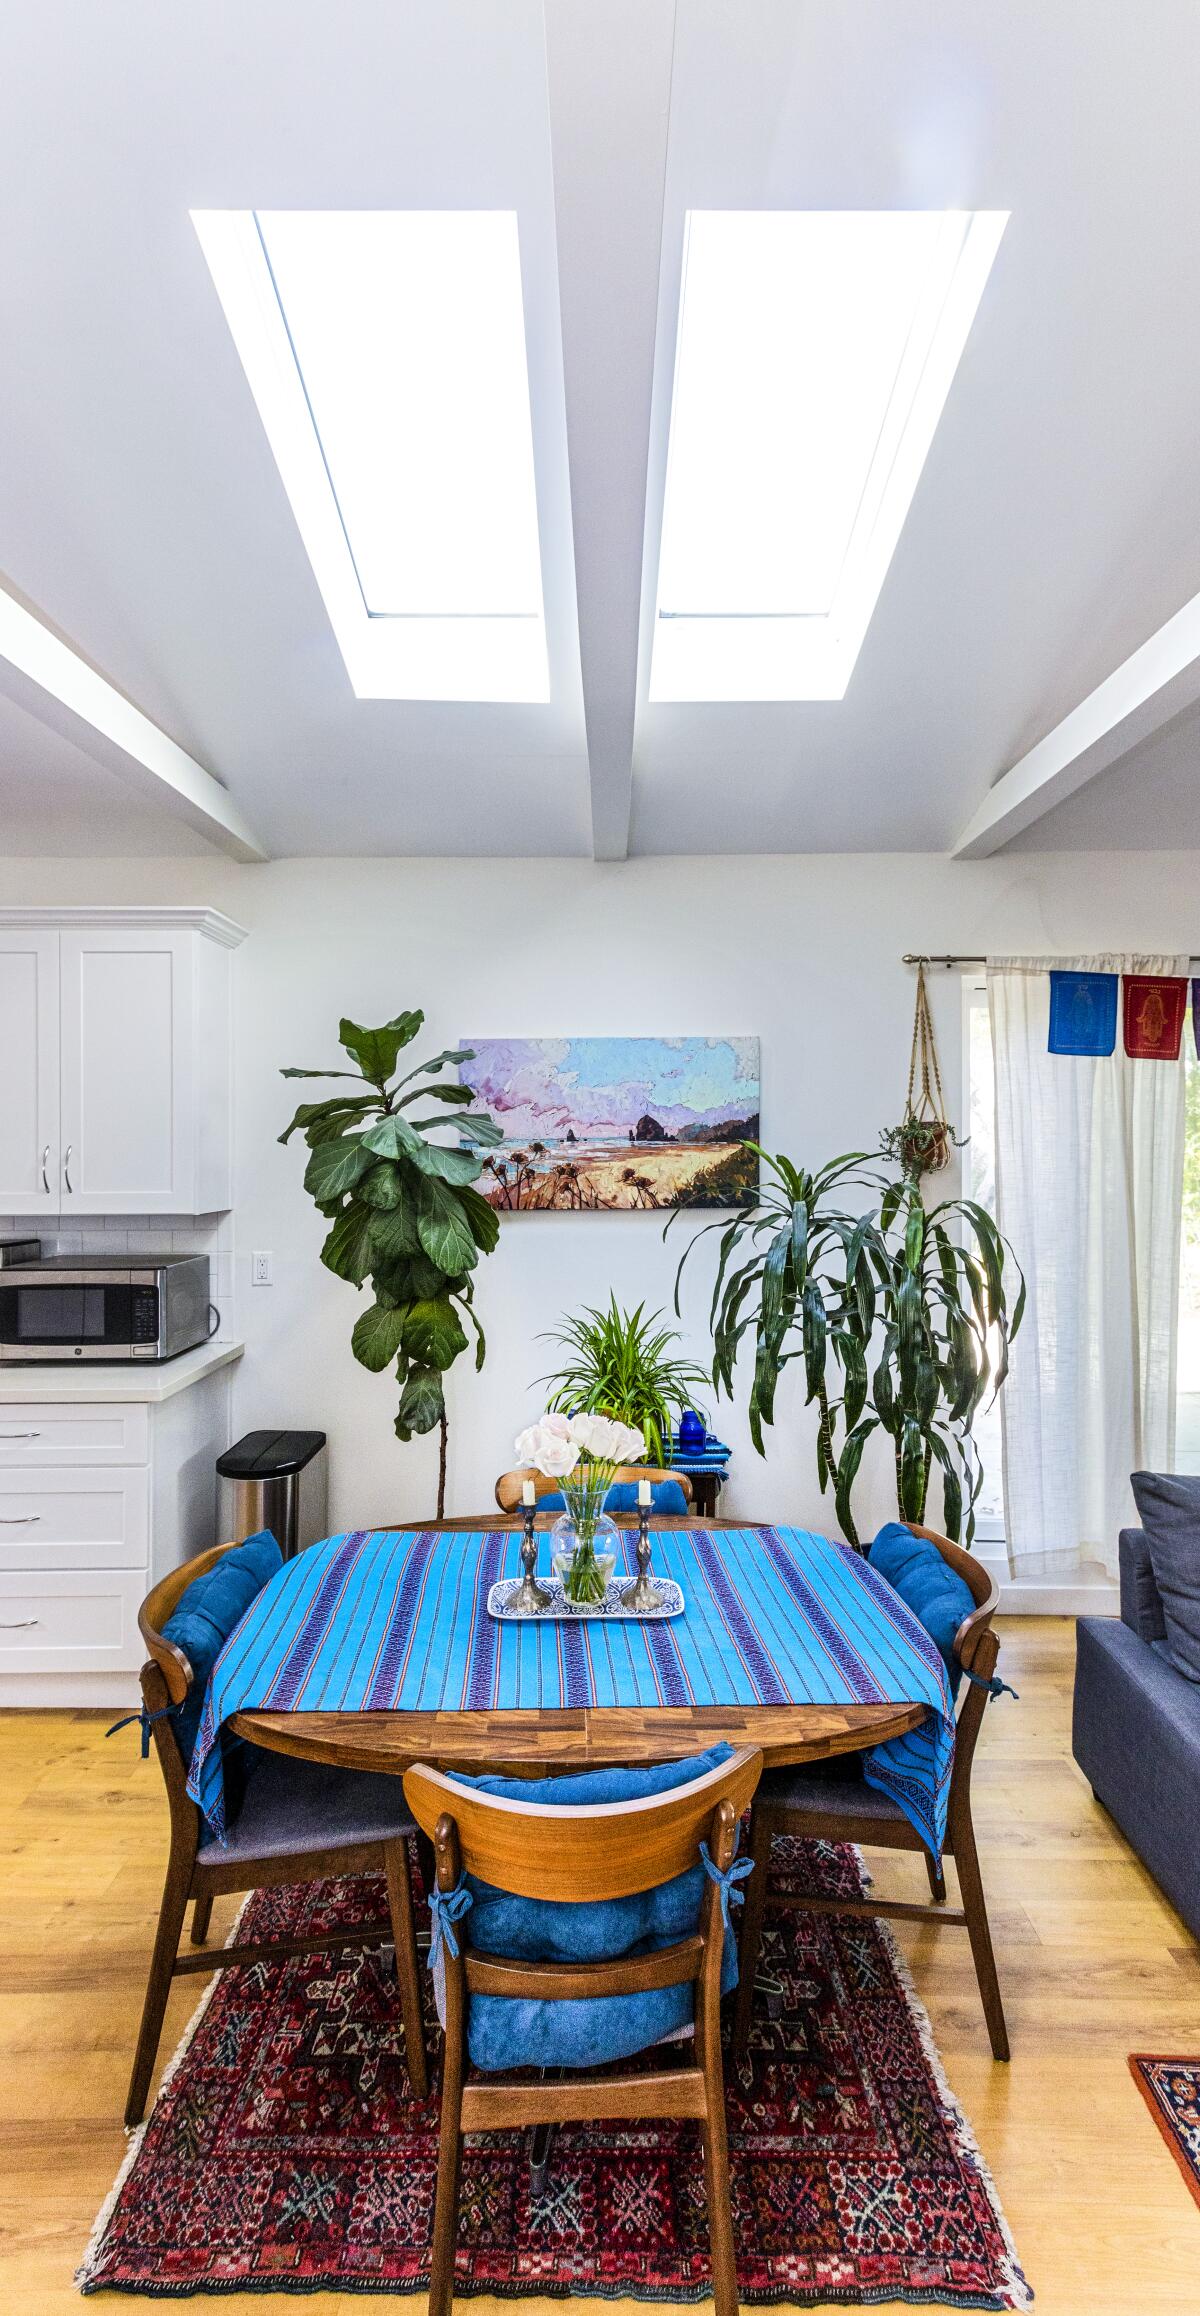 Light shines through skylights above a kitchen table with tall houseplants in the background.